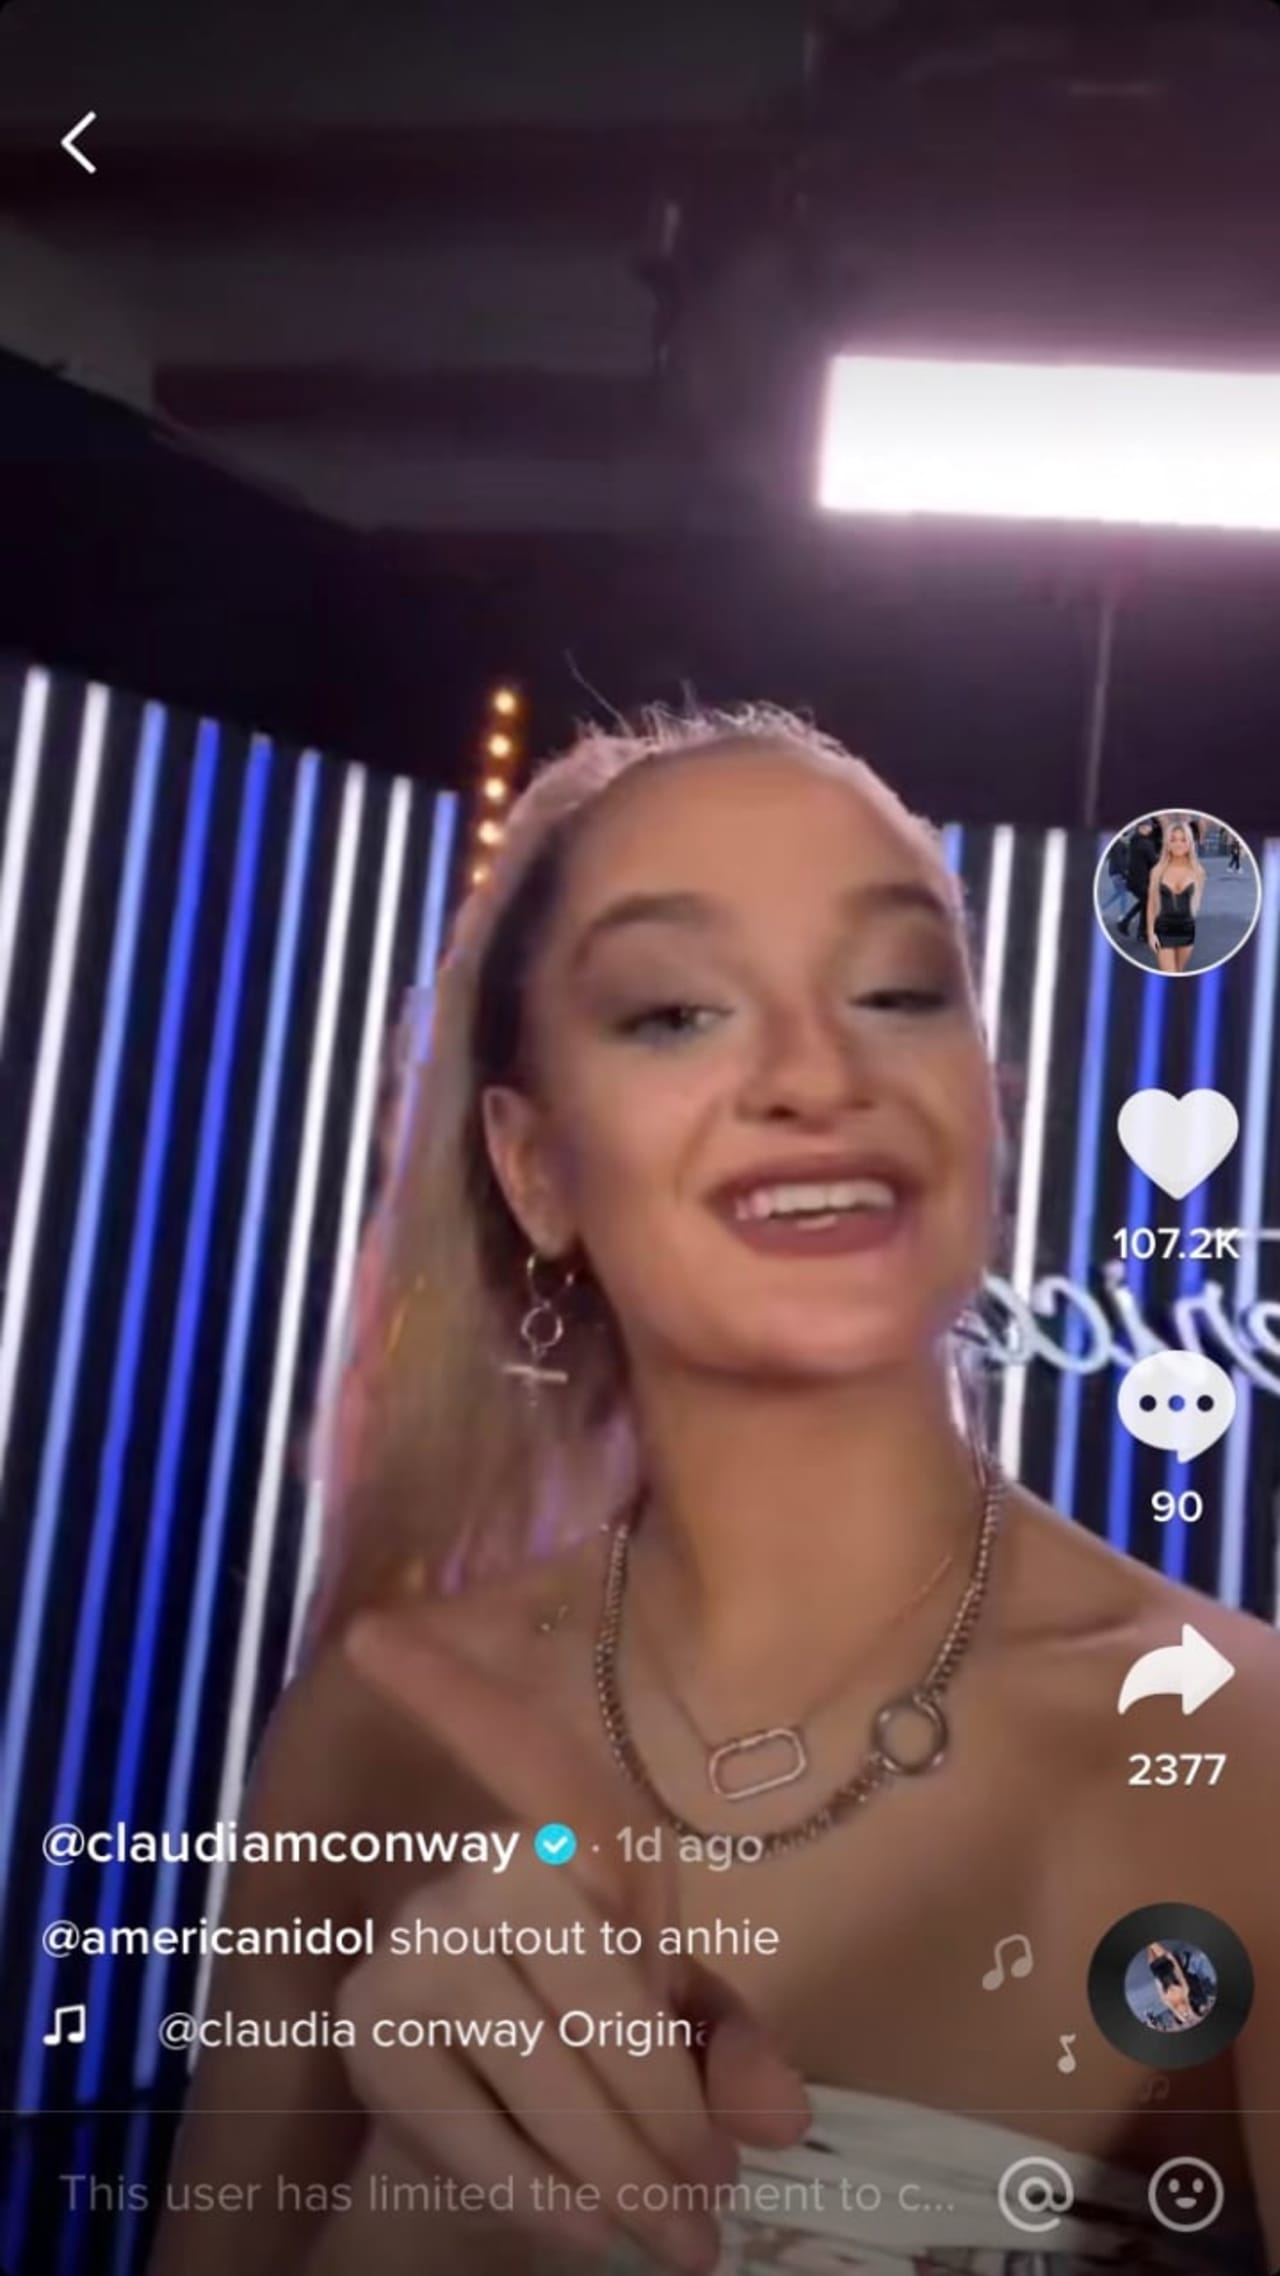 Claudia Conway teased her "American Idol" audition Sunday on TikTok.